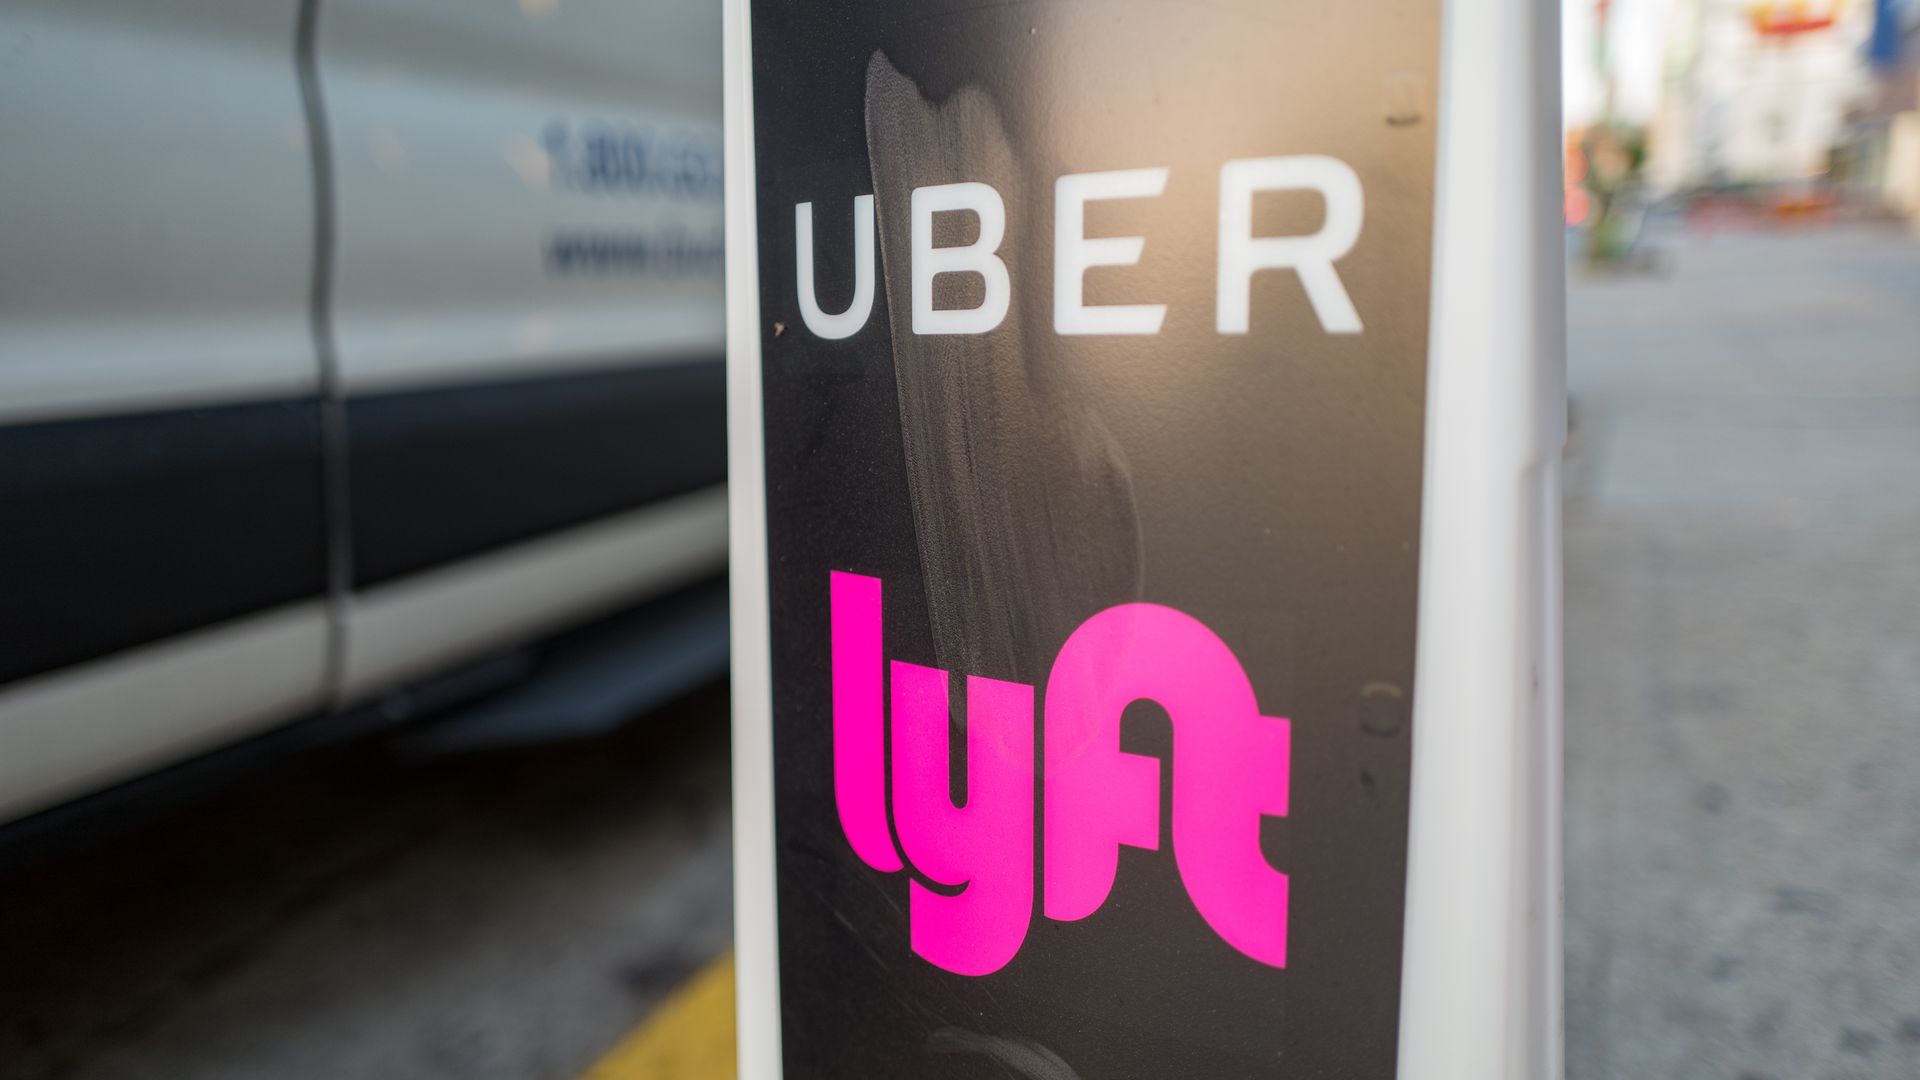 In this image, the Uber and Lyft logos are stacked on top of one another on a pole